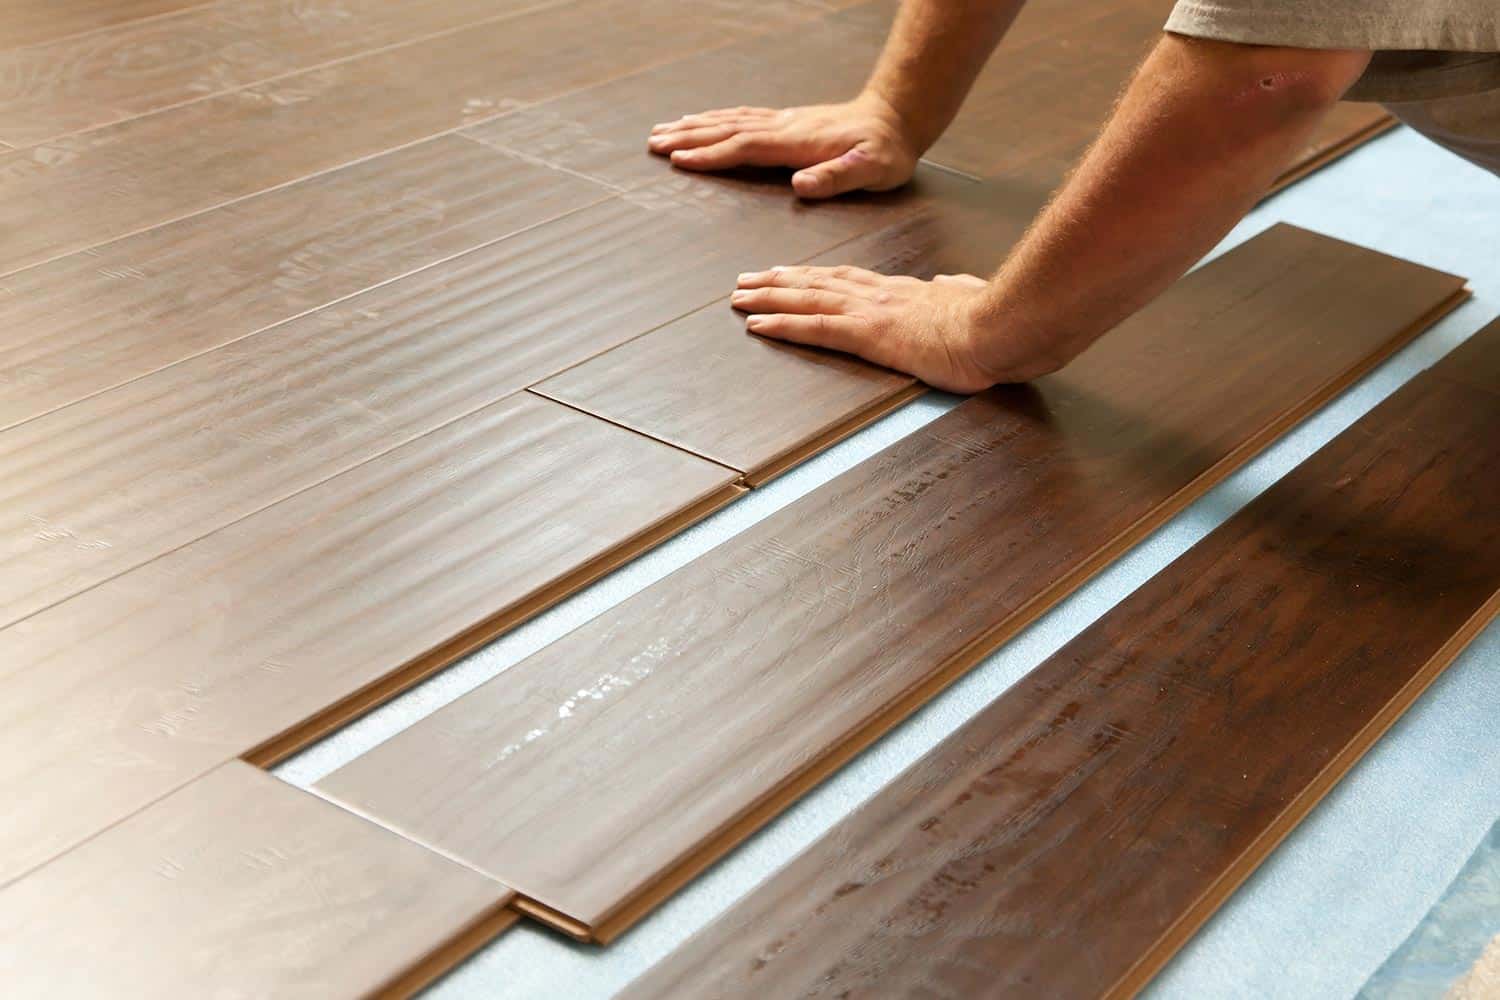 Can You Glue Down A Floating Floor, Can Floating Vinyl Plank Flooring Be Glued Down